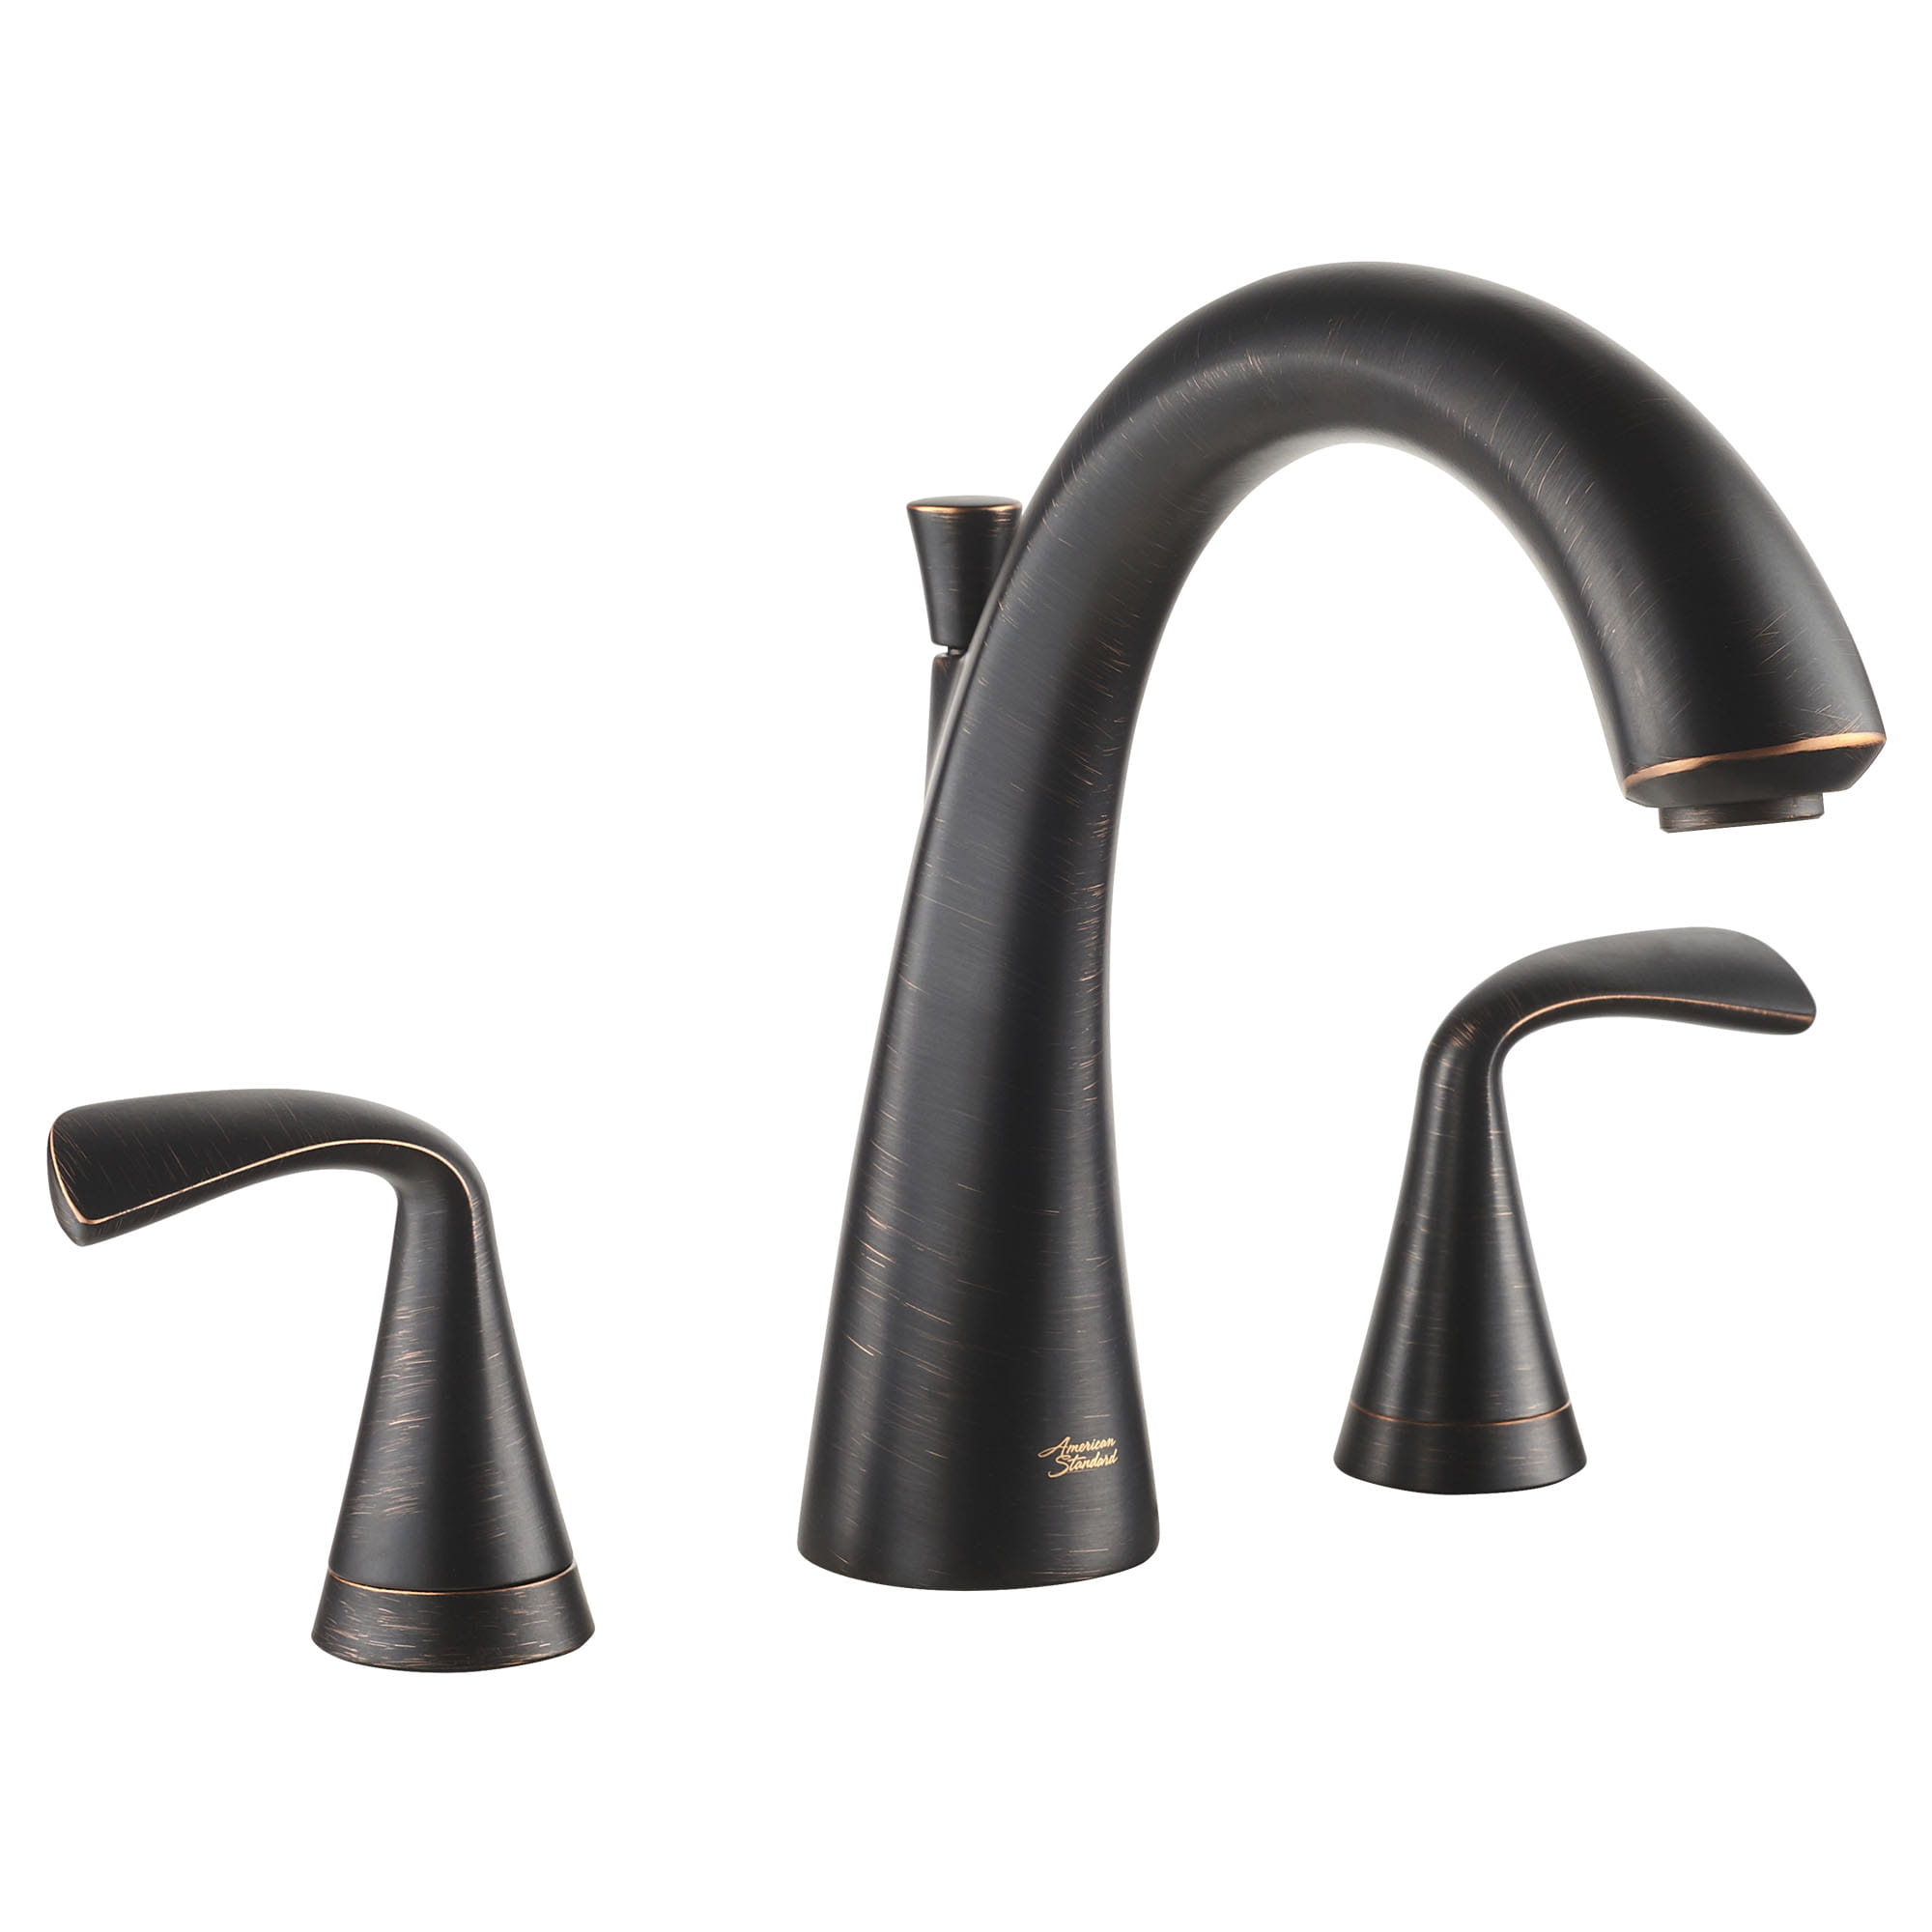 Fluent Bathtub Faucet With Lever Handles for Flash Rough In Valve LEGACY BRONZE